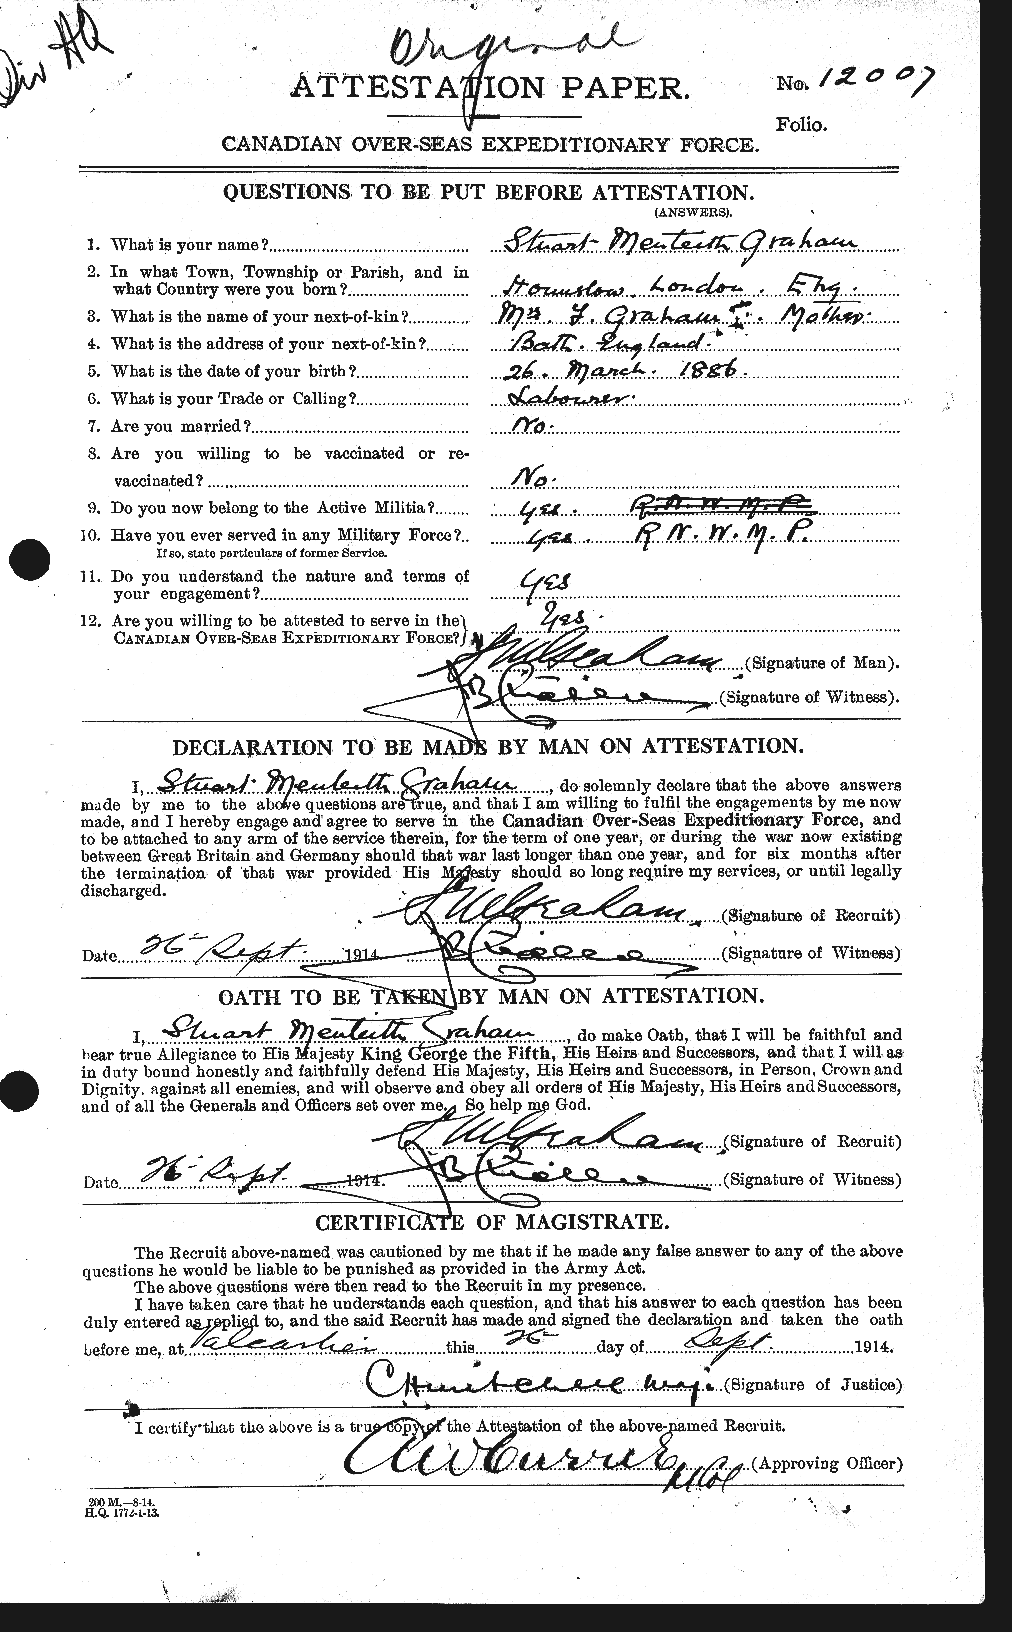 Personnel Records of the First World War - CEF 359474a